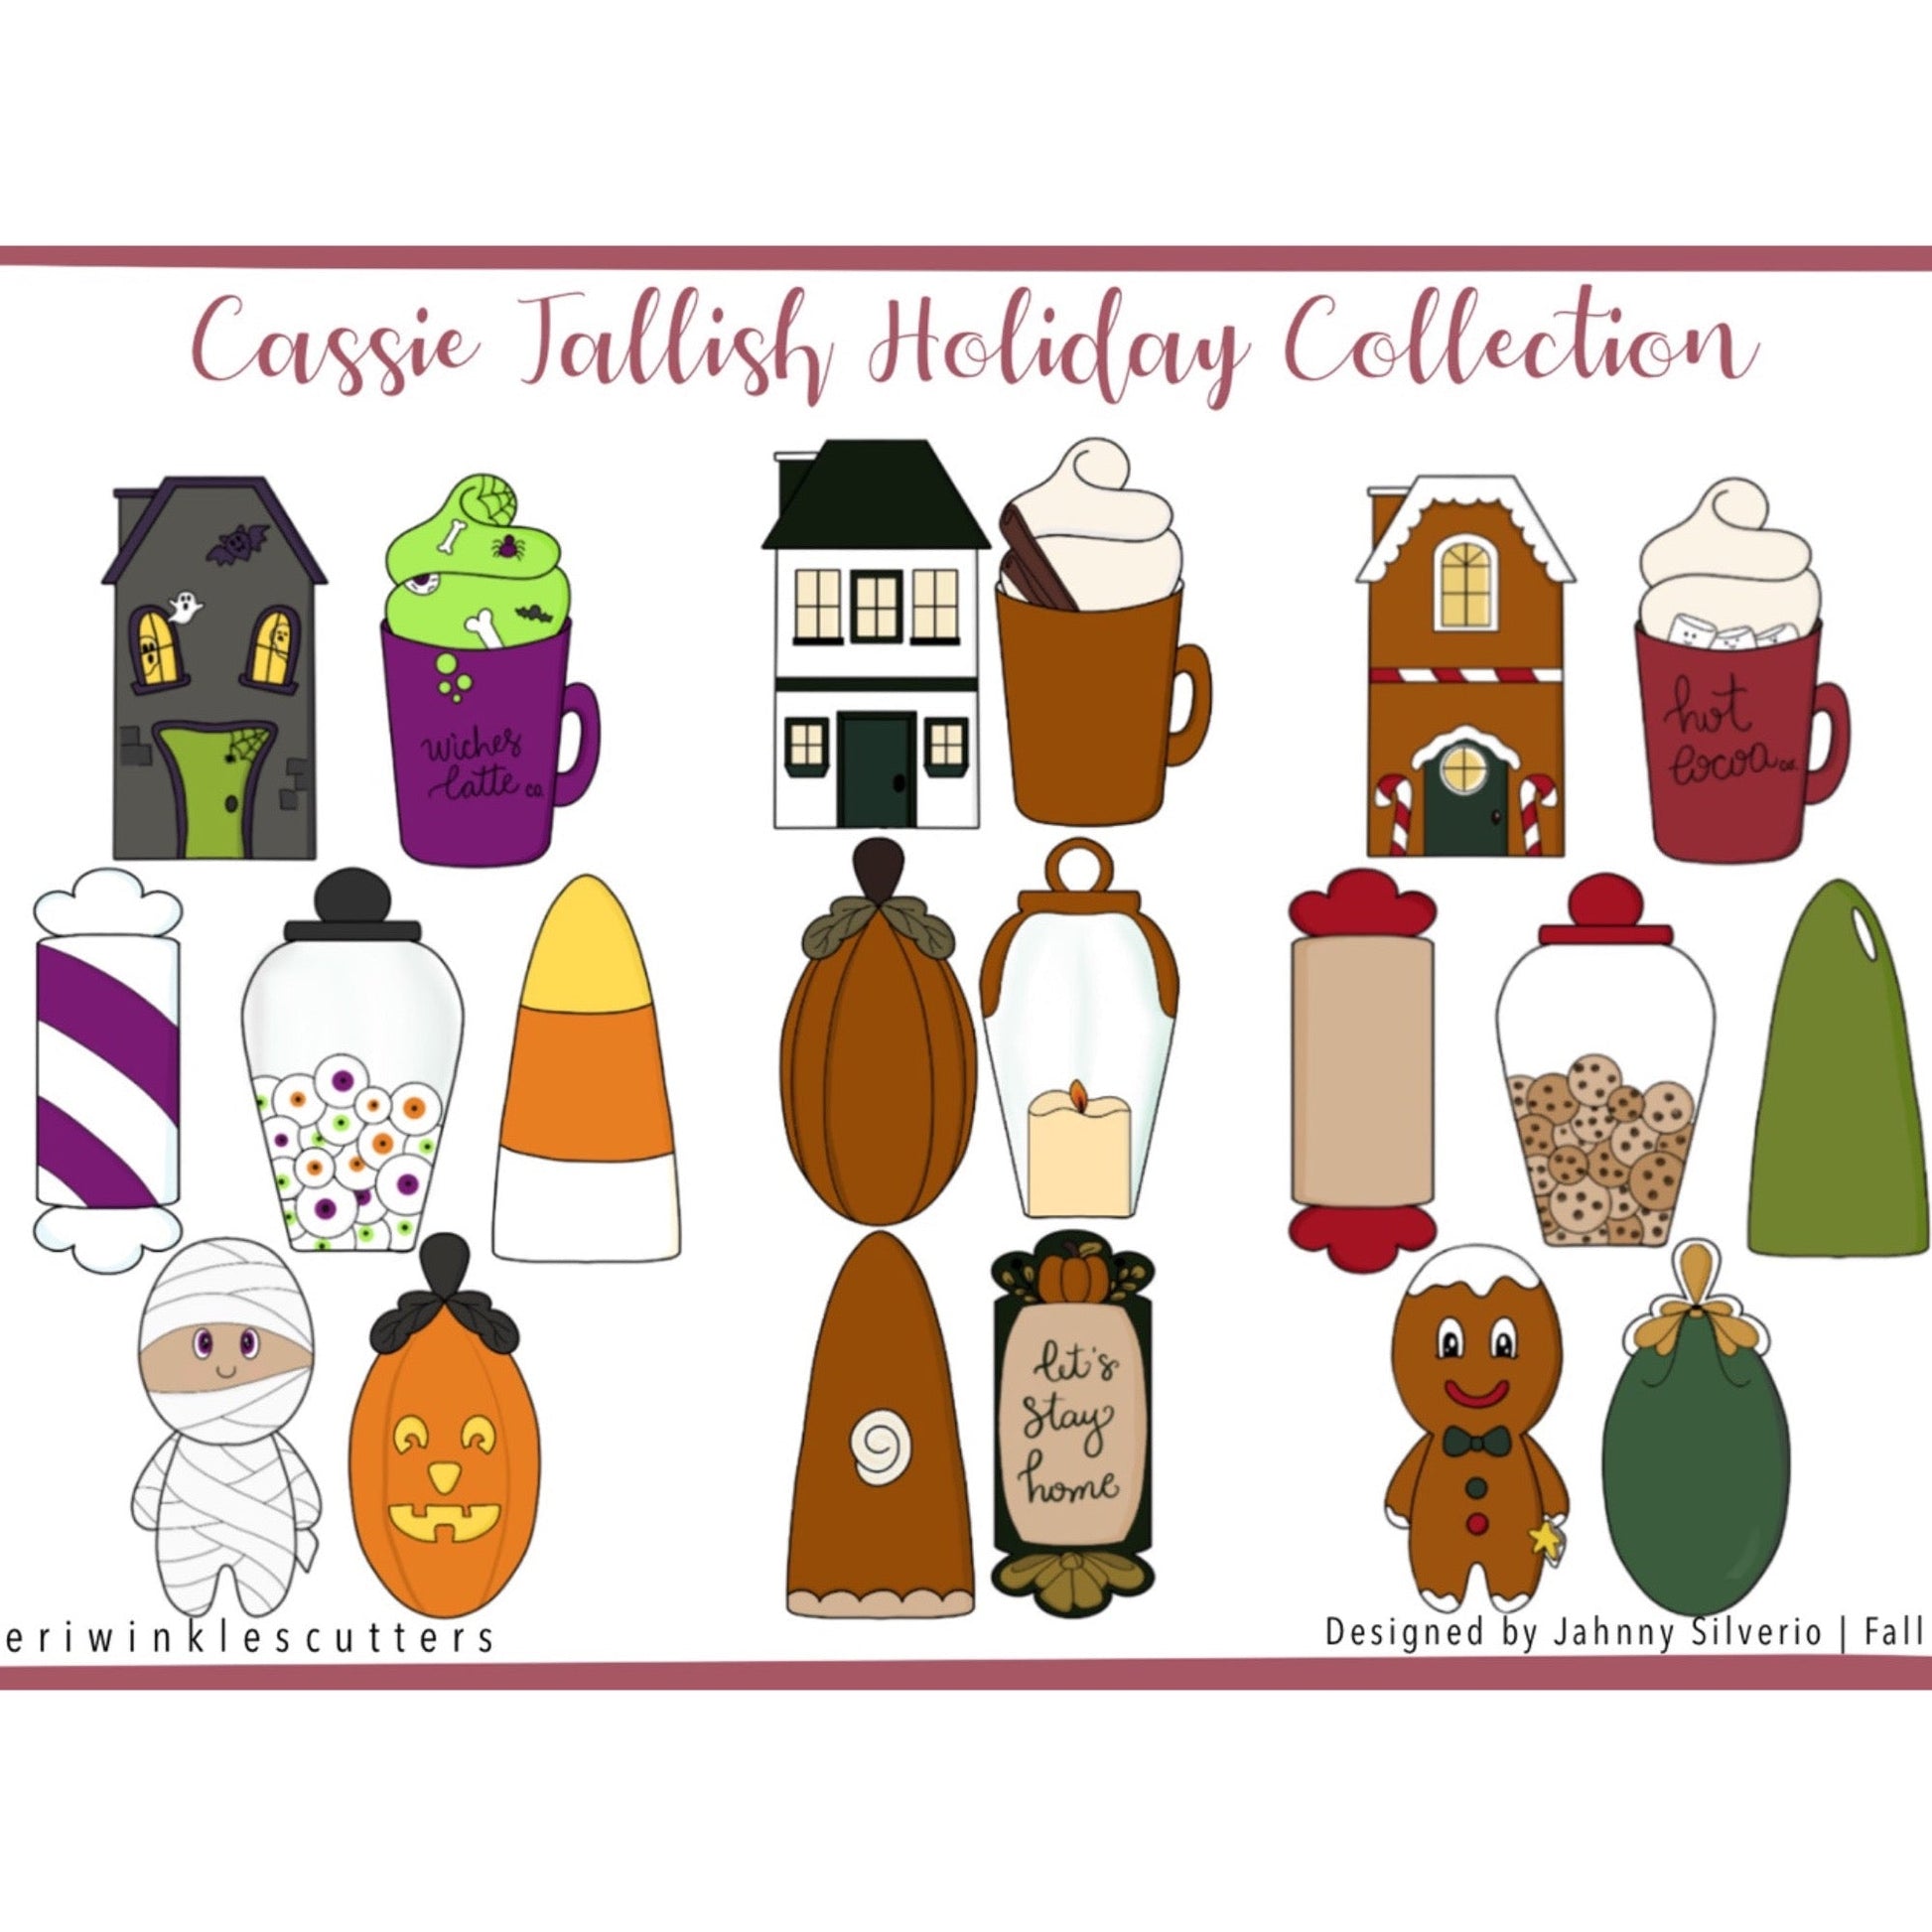 Cassie Tallish Holiday Collection Set of 7 Cookie Cutters - Periwinkles Cutters